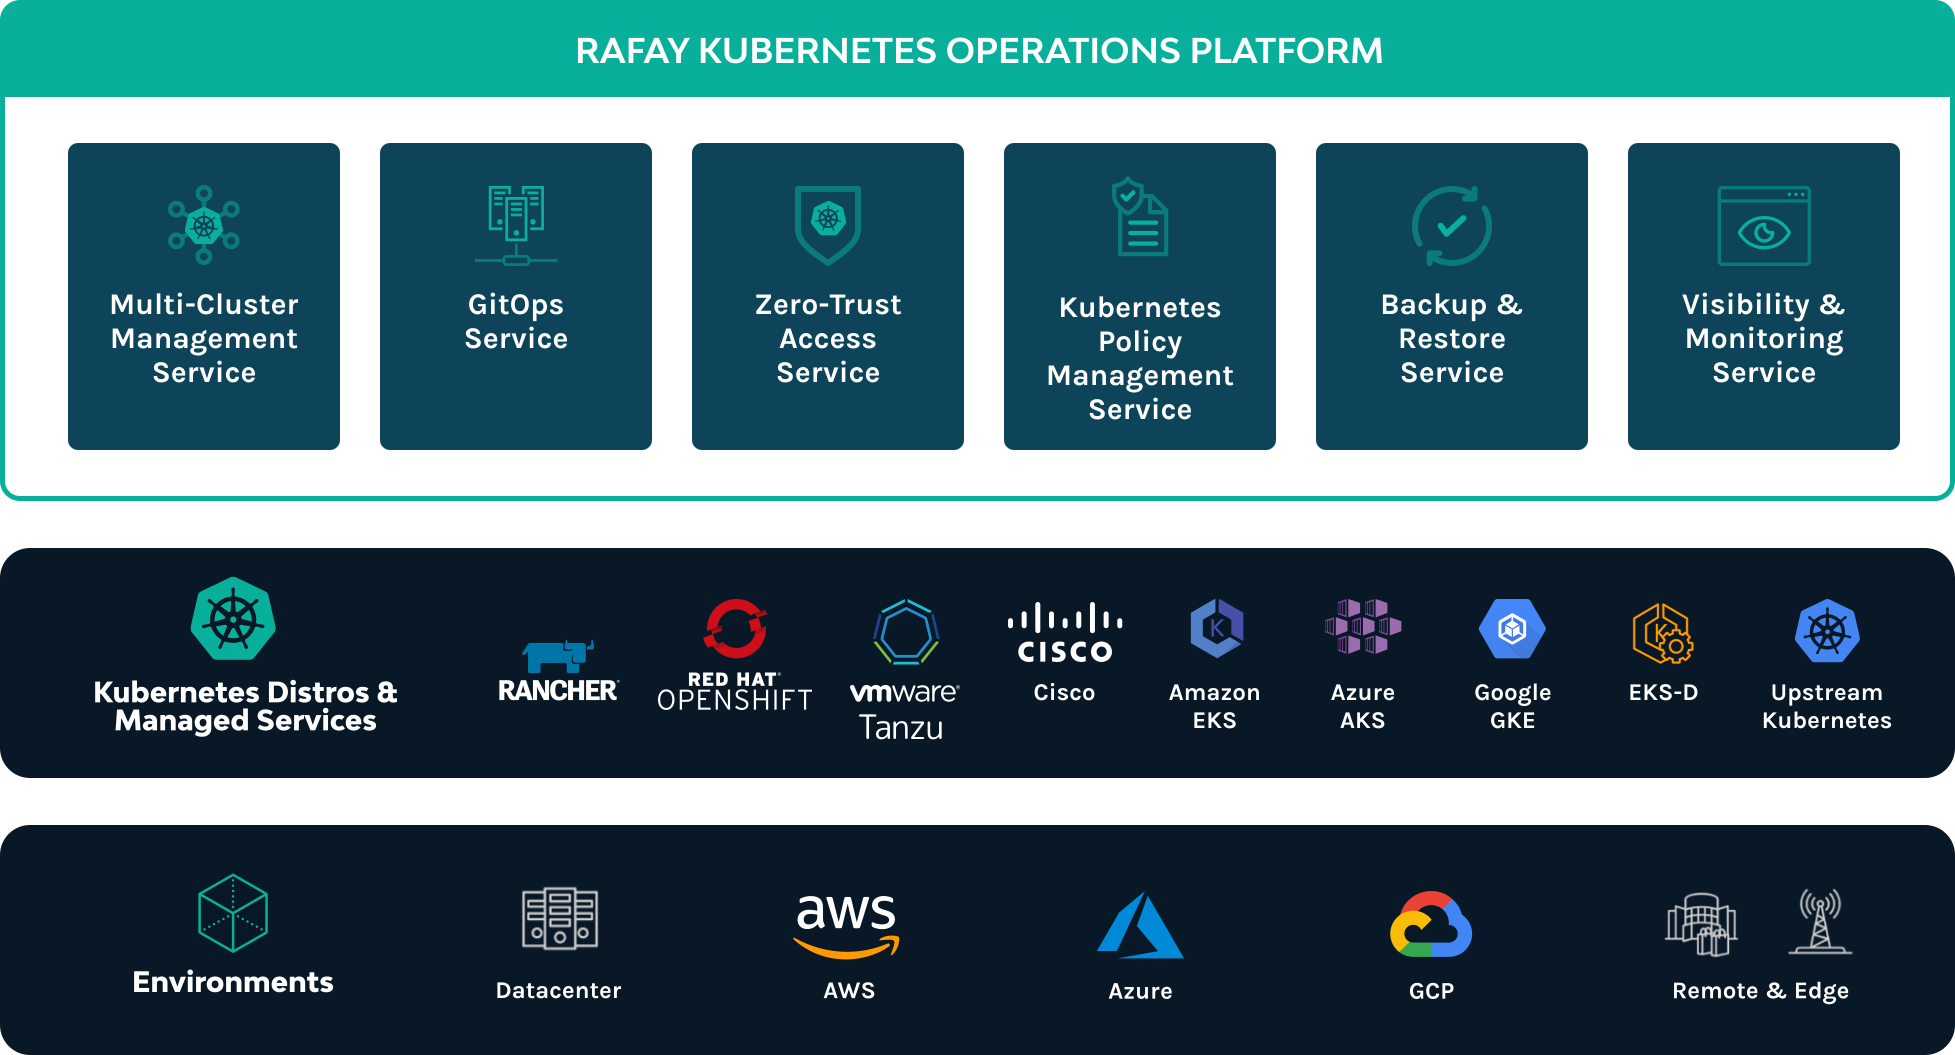 Rafay overview